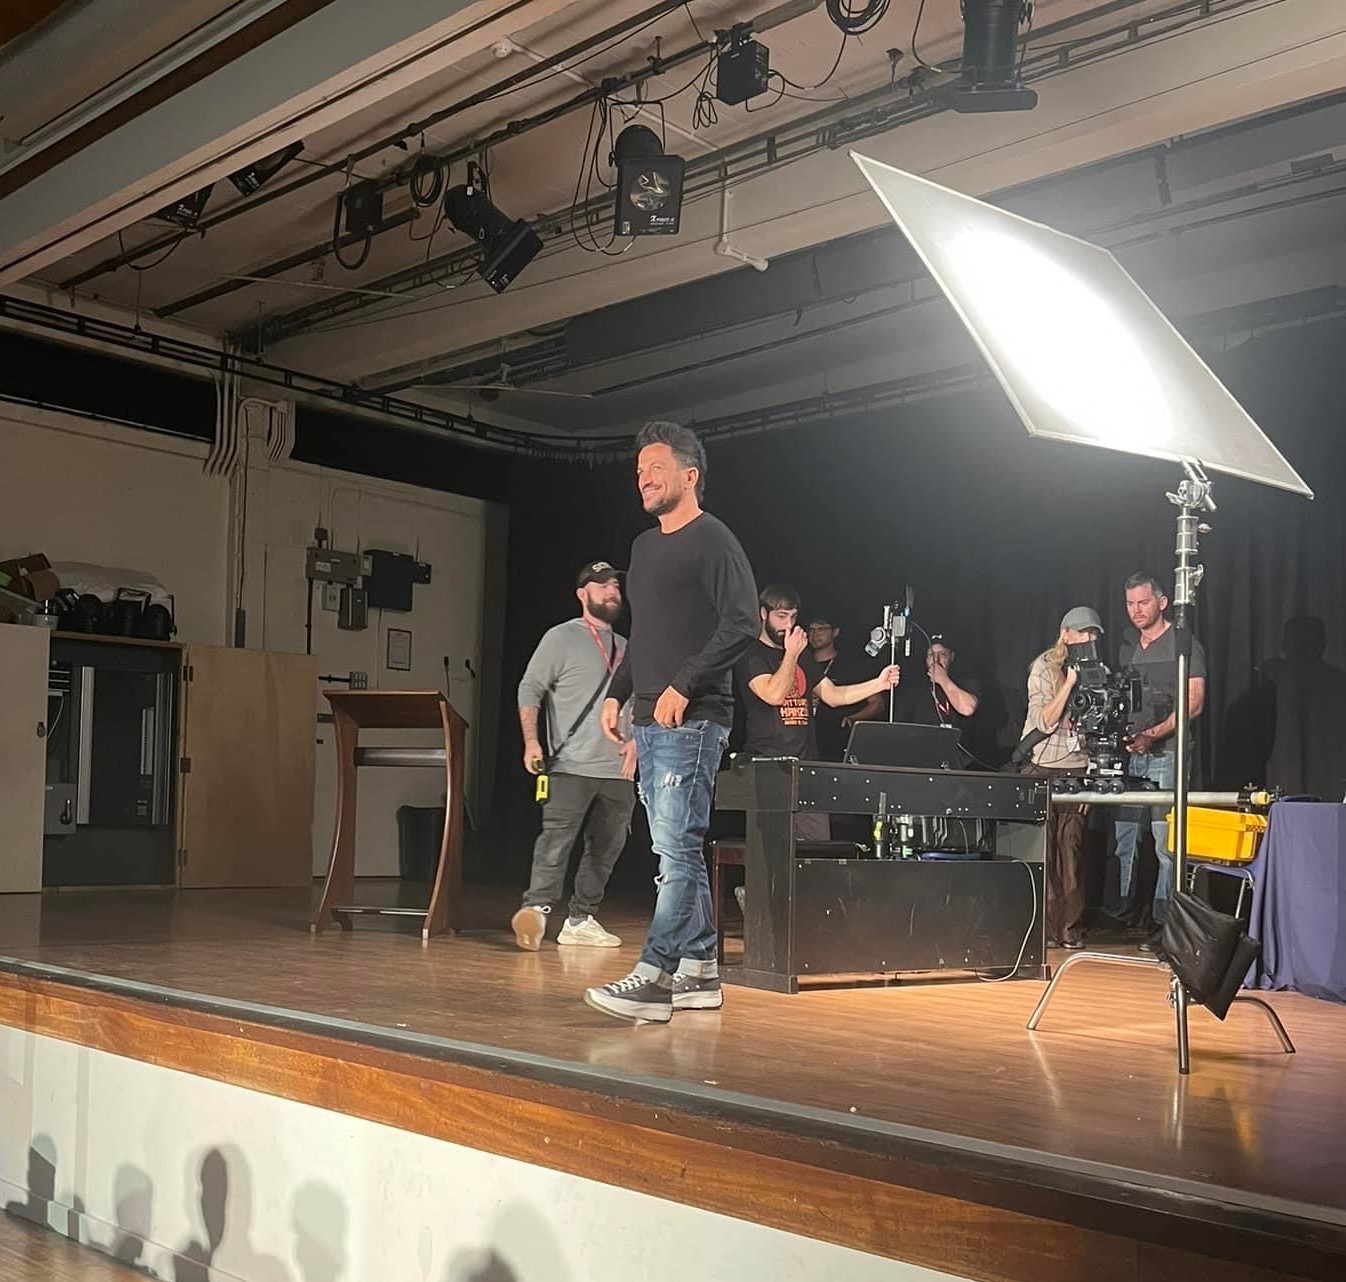 Peter Andre visits Coggeshall school for film shoot